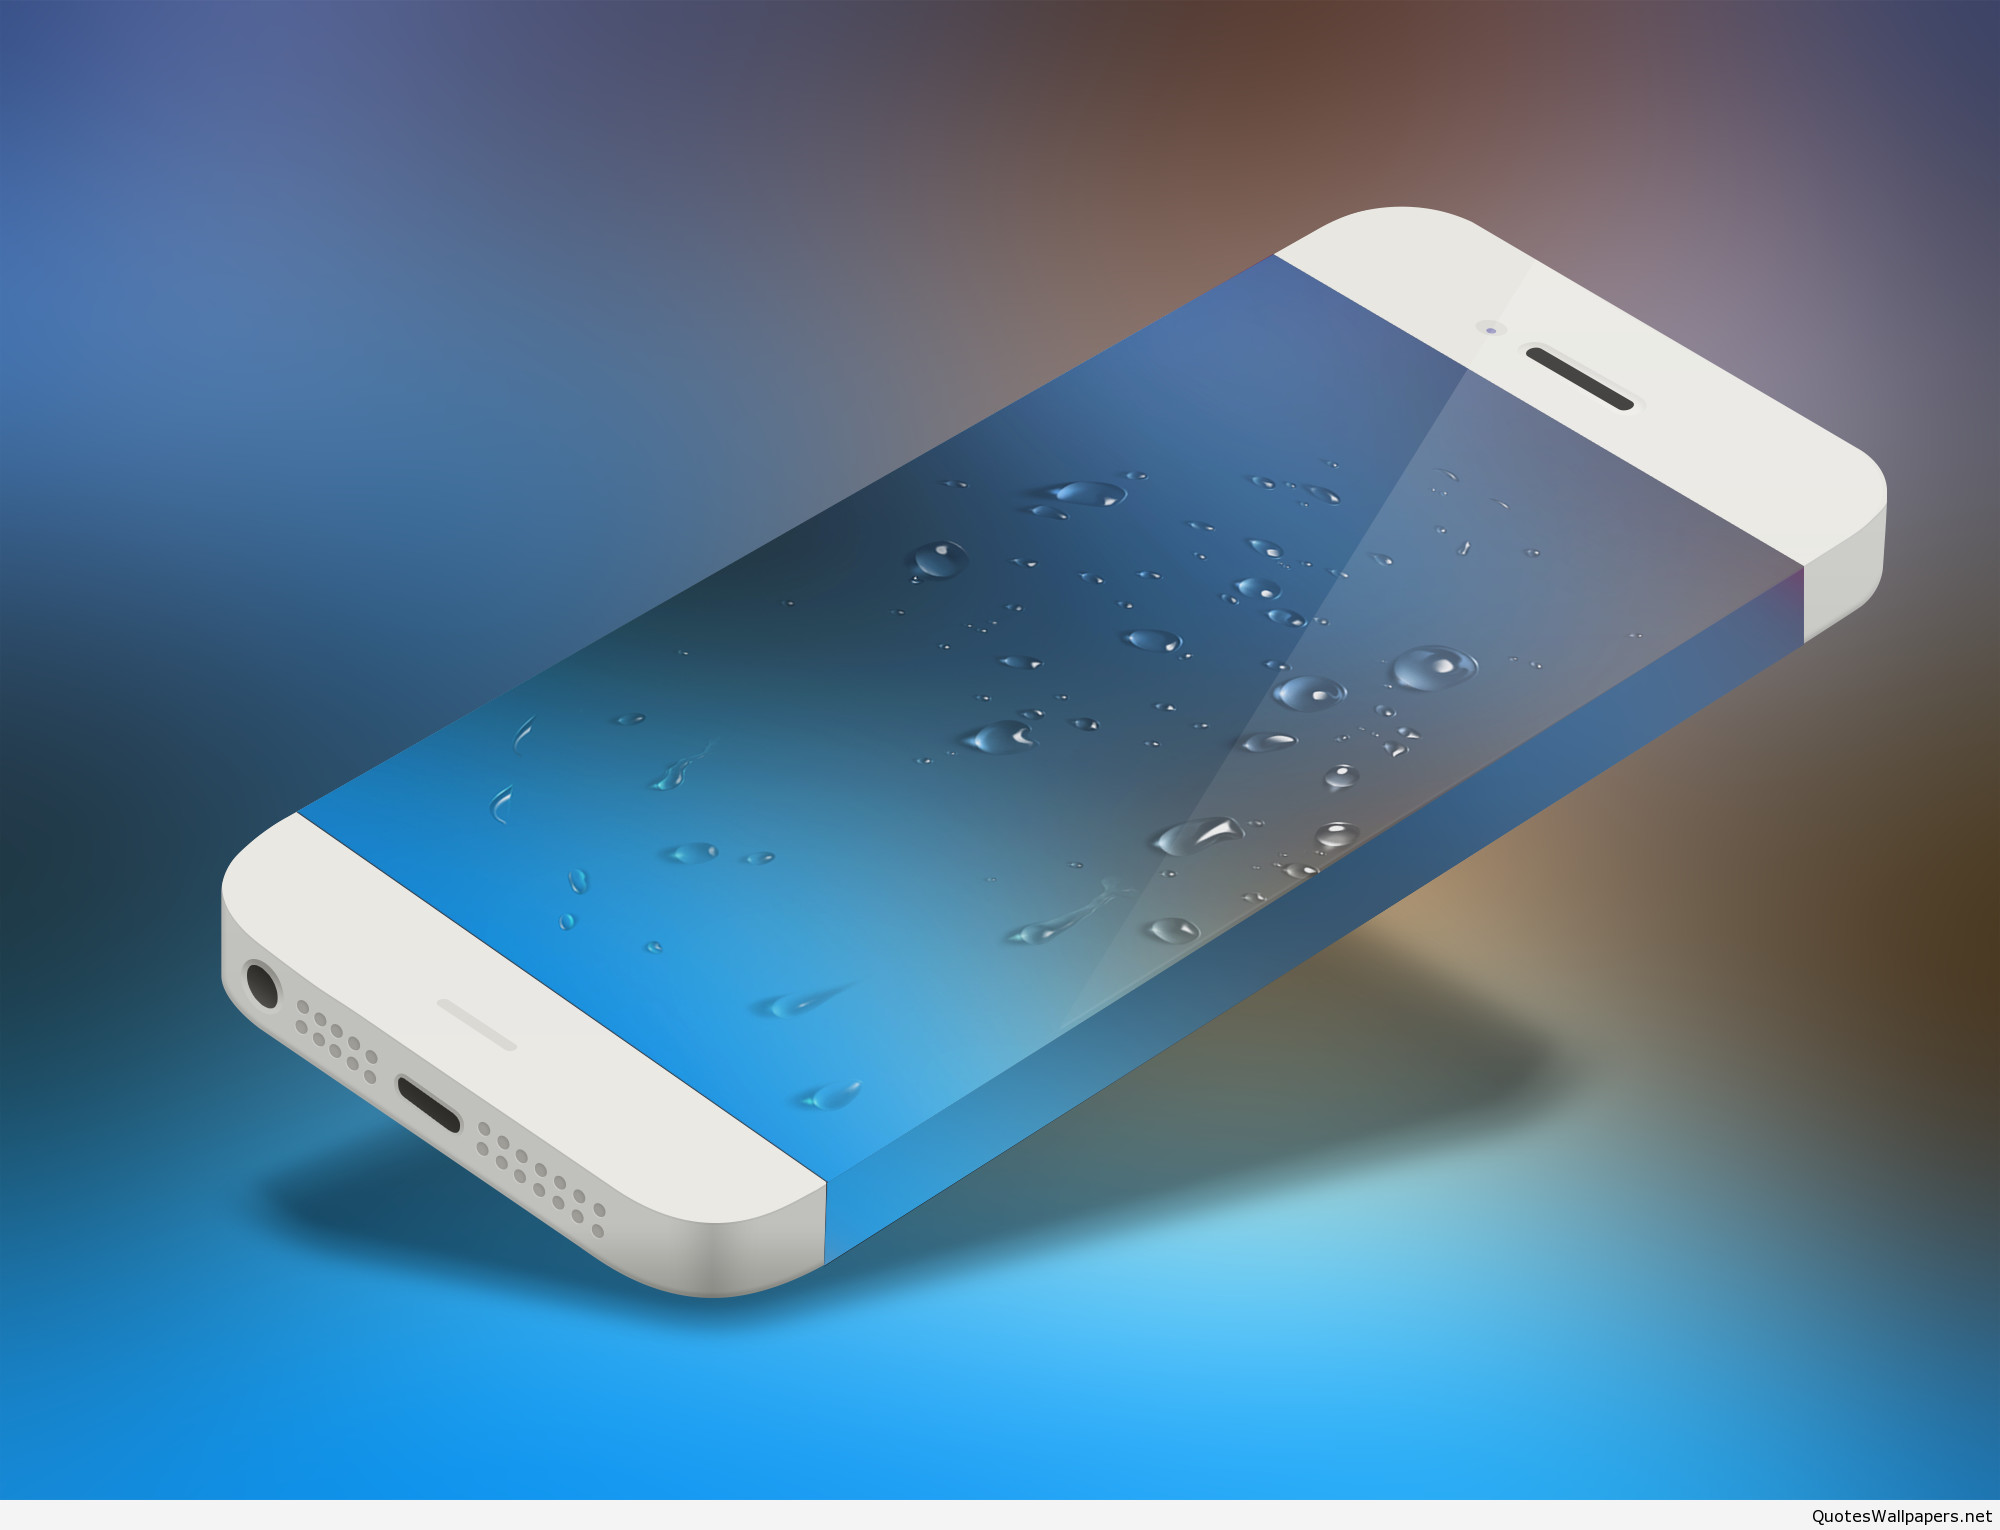 2000x1530 This wallpaper has been designed as a home screen for the iPhone 5, 5s &